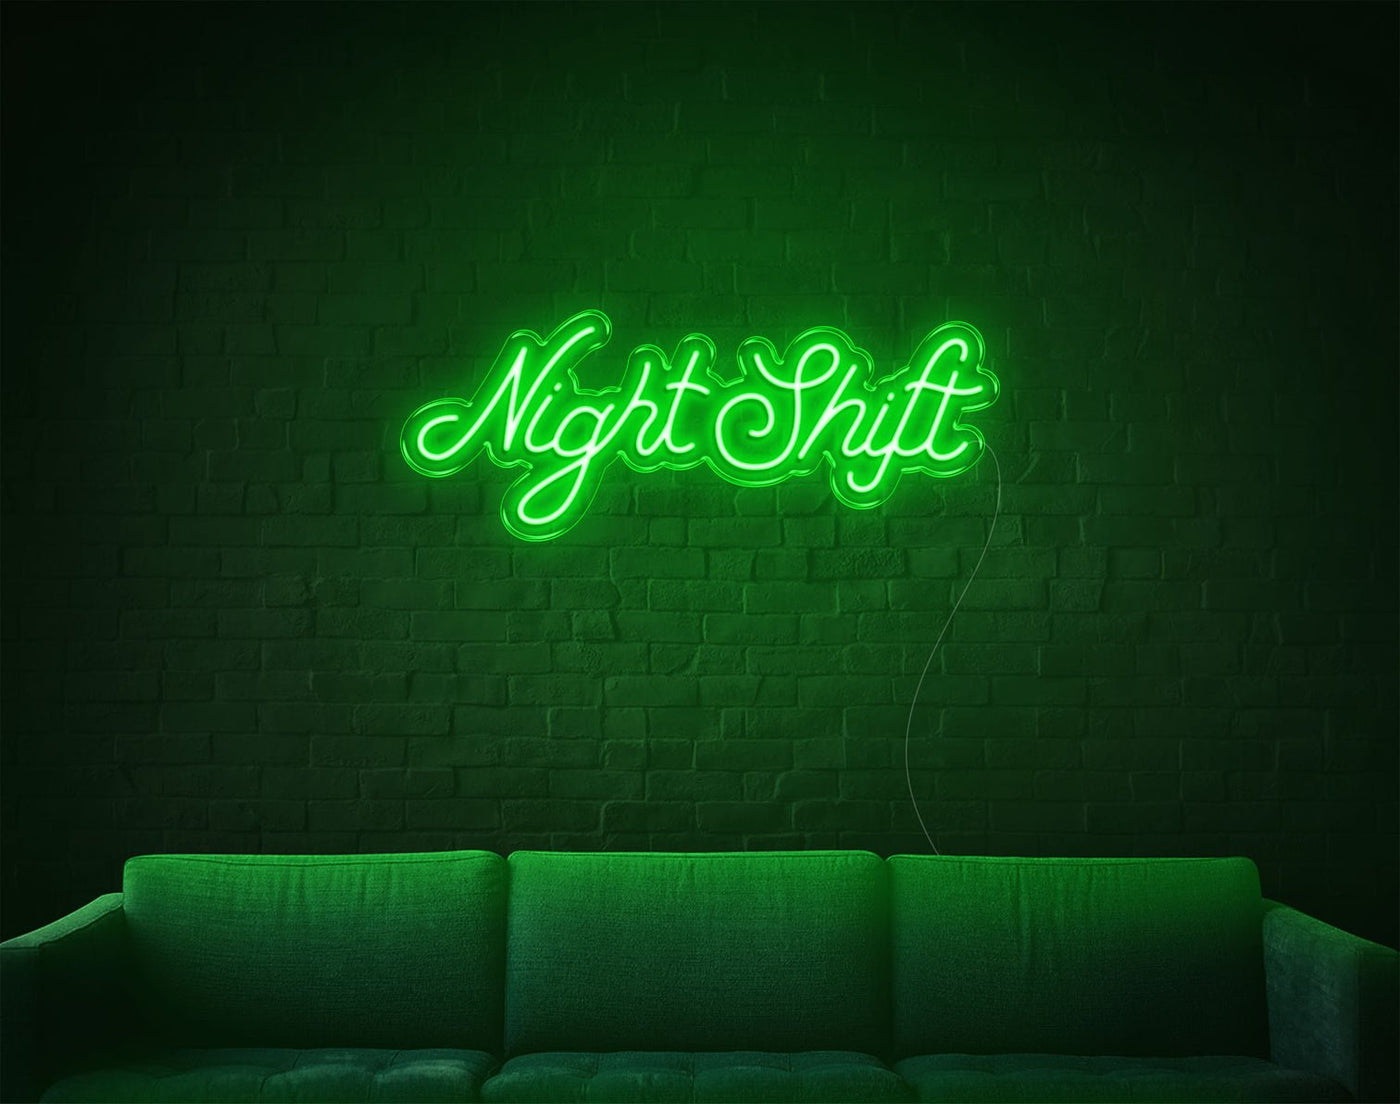 Nightshift LED Neon Sign - 11inch x 30inchGreen